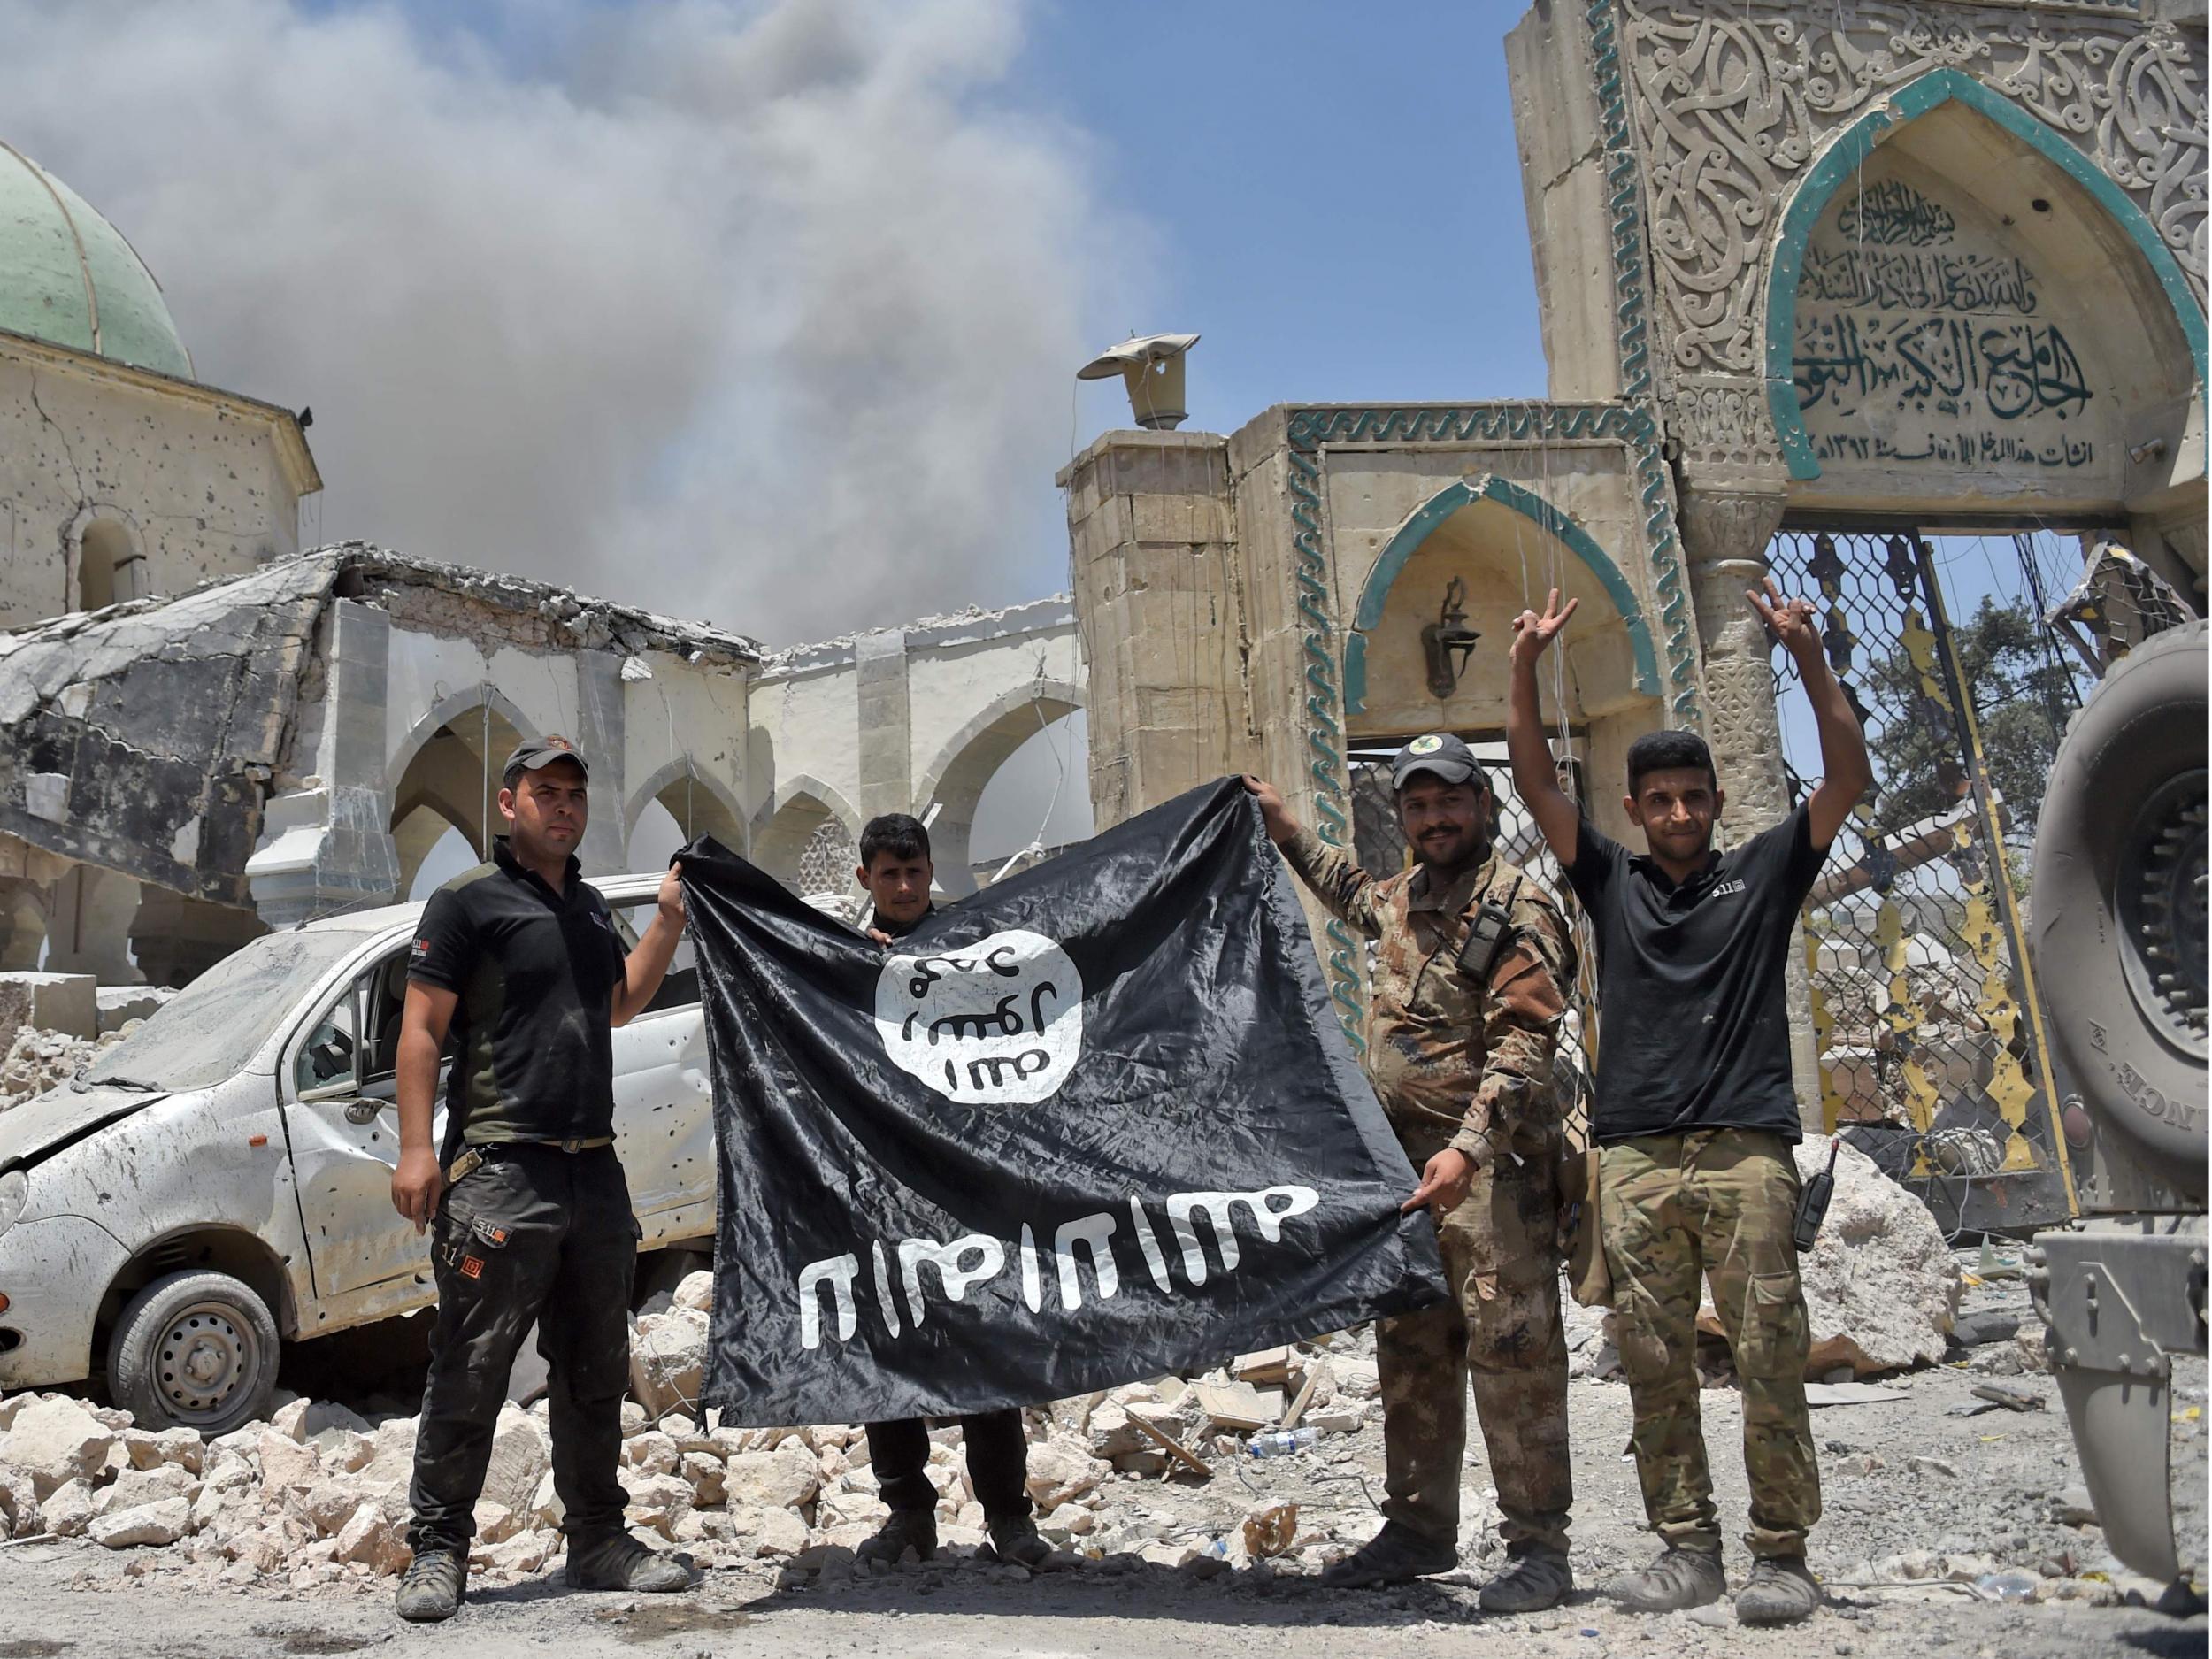 A member of the Iraqi Special Forces raises the victory gesture as others hold upside-down Isis flag outside the destroyed Al-Nuri Mosque in the Old City of Mosul, after the area was retaken